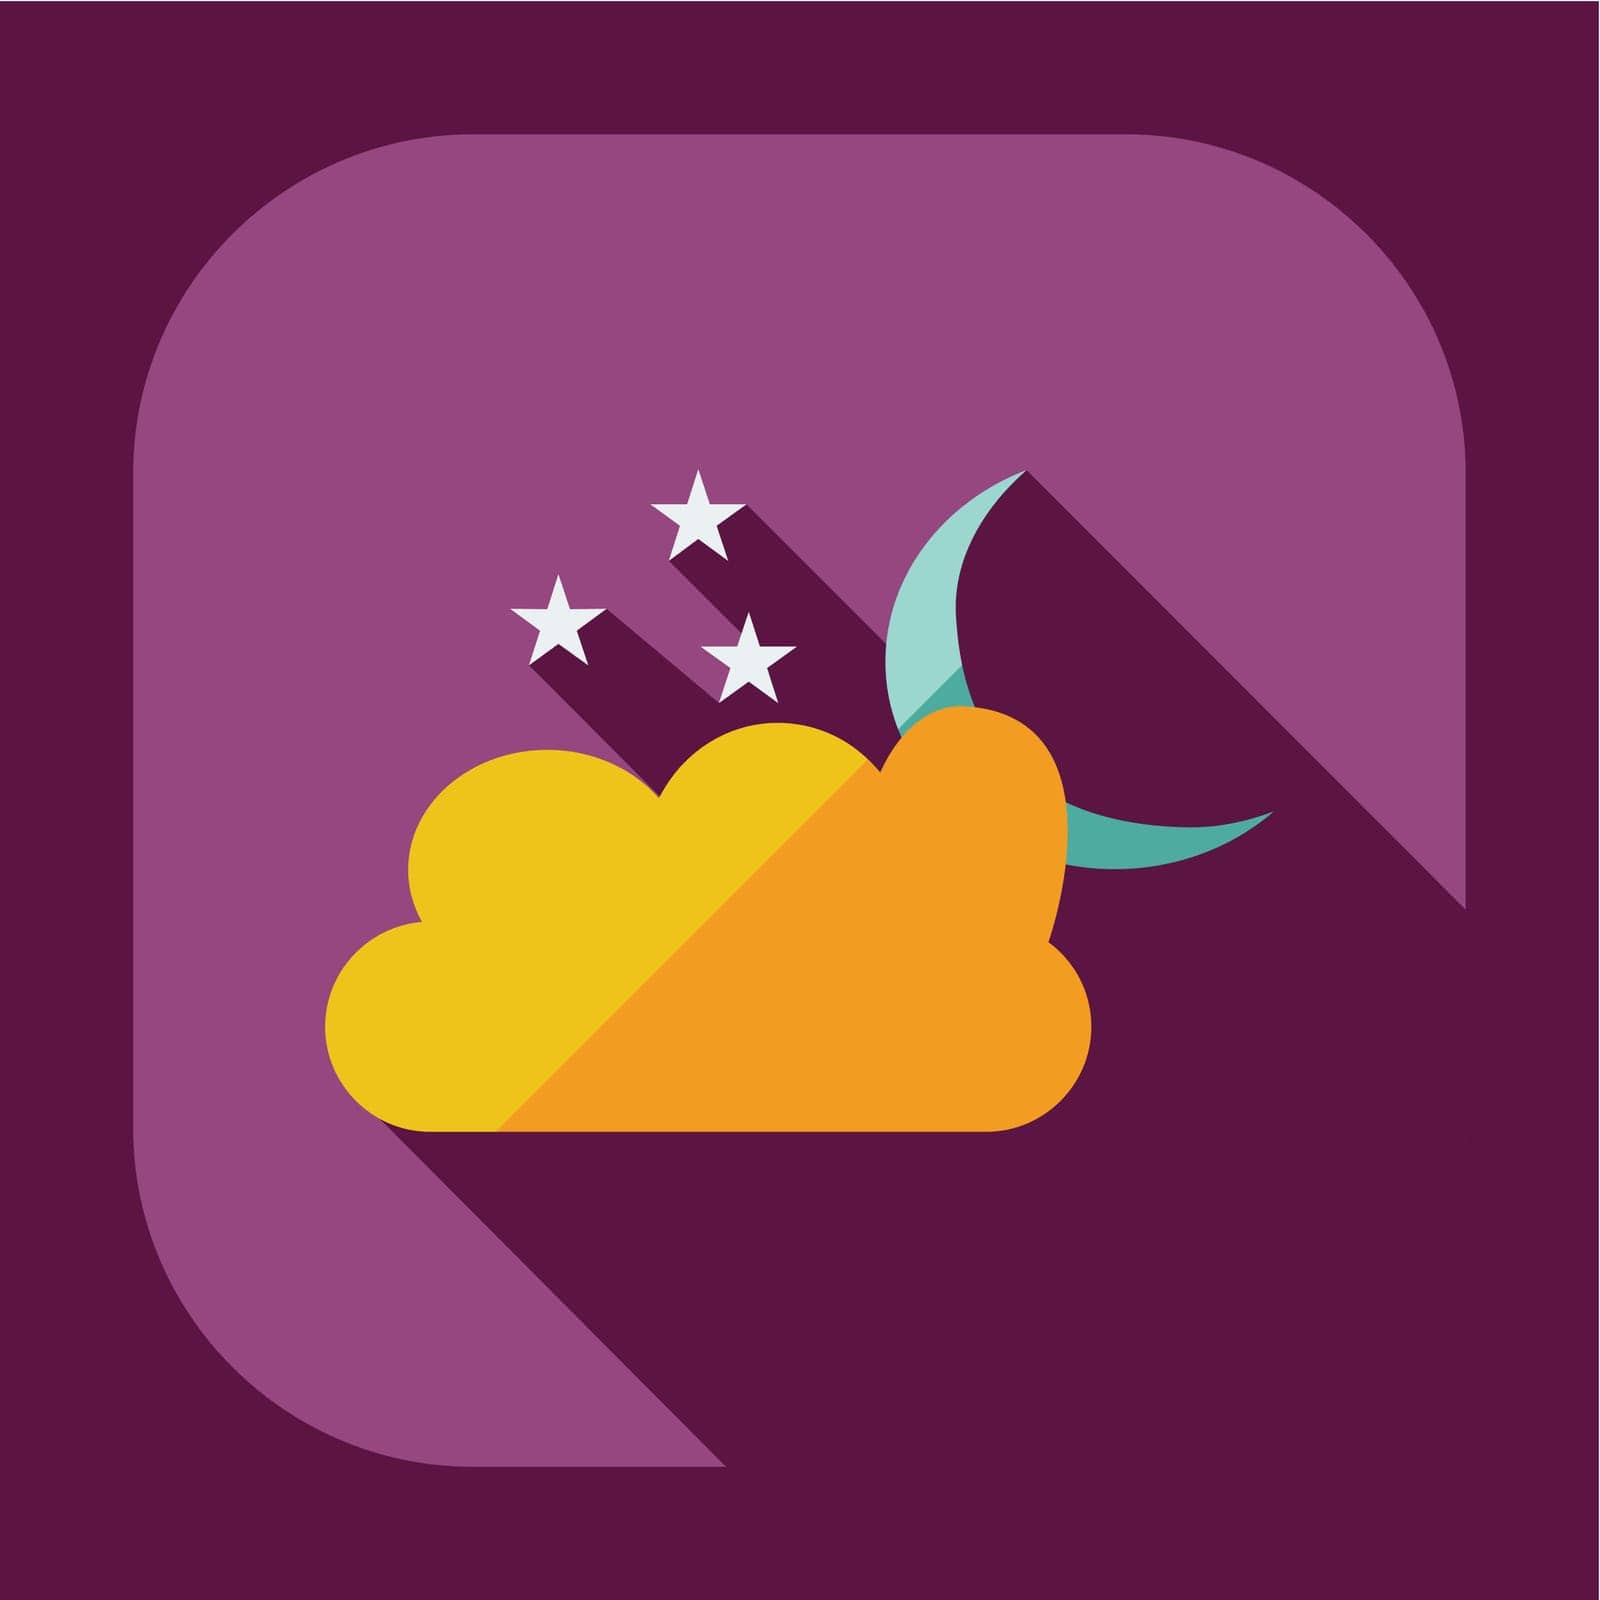 symbol,moonlight,shadow,eps10,idea,icon,bright,astrology,space,cloud,usability,modern,starry,web,flat,design,dark,vector,seo,programming,sky,app,art,set,wallpaper,business,nature,social,texture,night,mobile,stars,abstract,astronomy,shine,badge,marketing,moon,blue,application,light,background,silhouette,shiny,illustration,card,working,optimization by ogqcorp